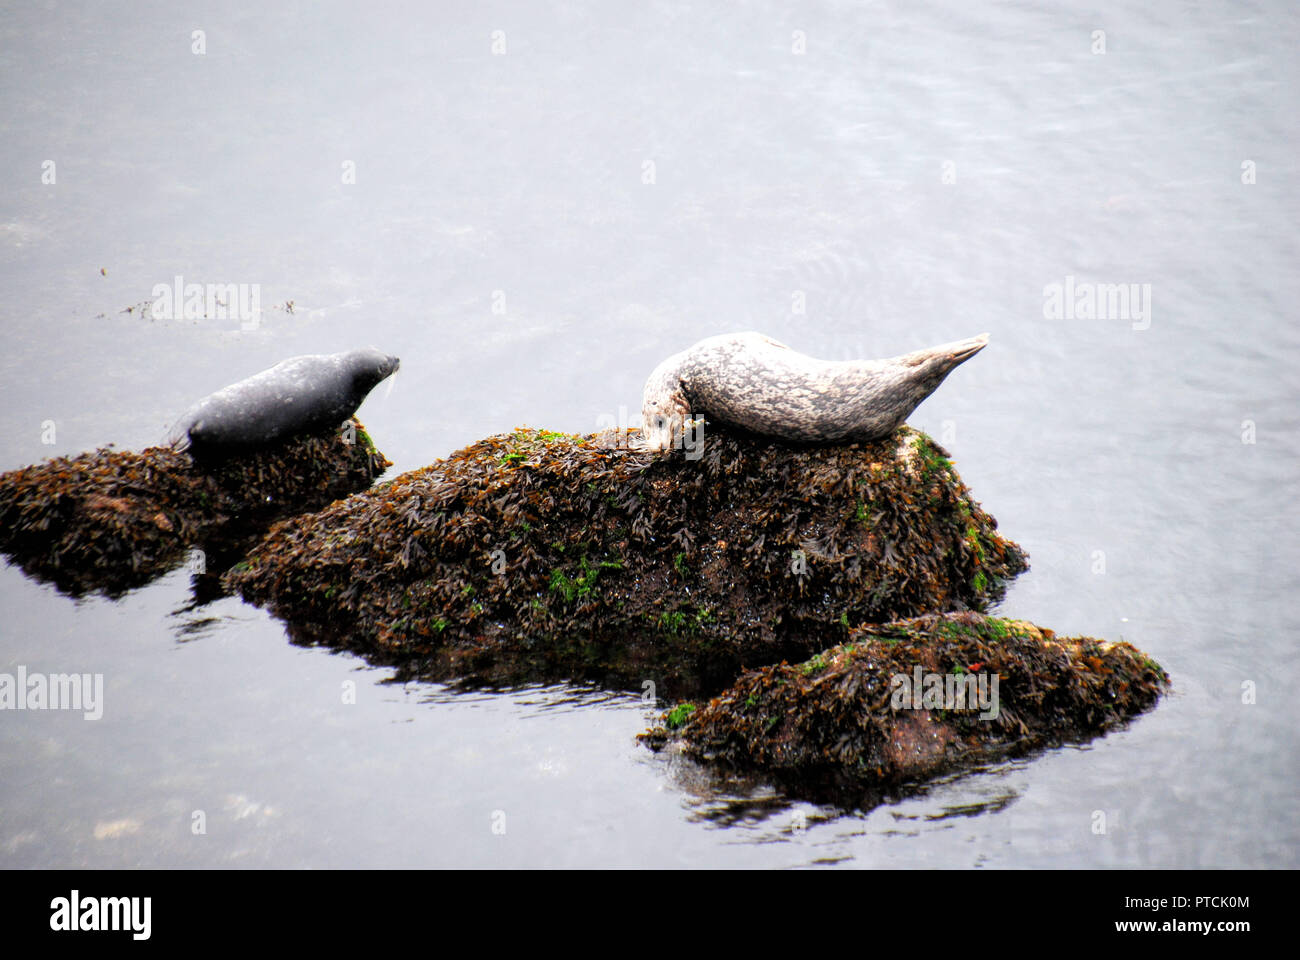 Two curious and cute Pacific harbor seals, one grey and one white and brown, resting on a rock in the sea in Horseshoe Bay, BC, Canada Stock Photo